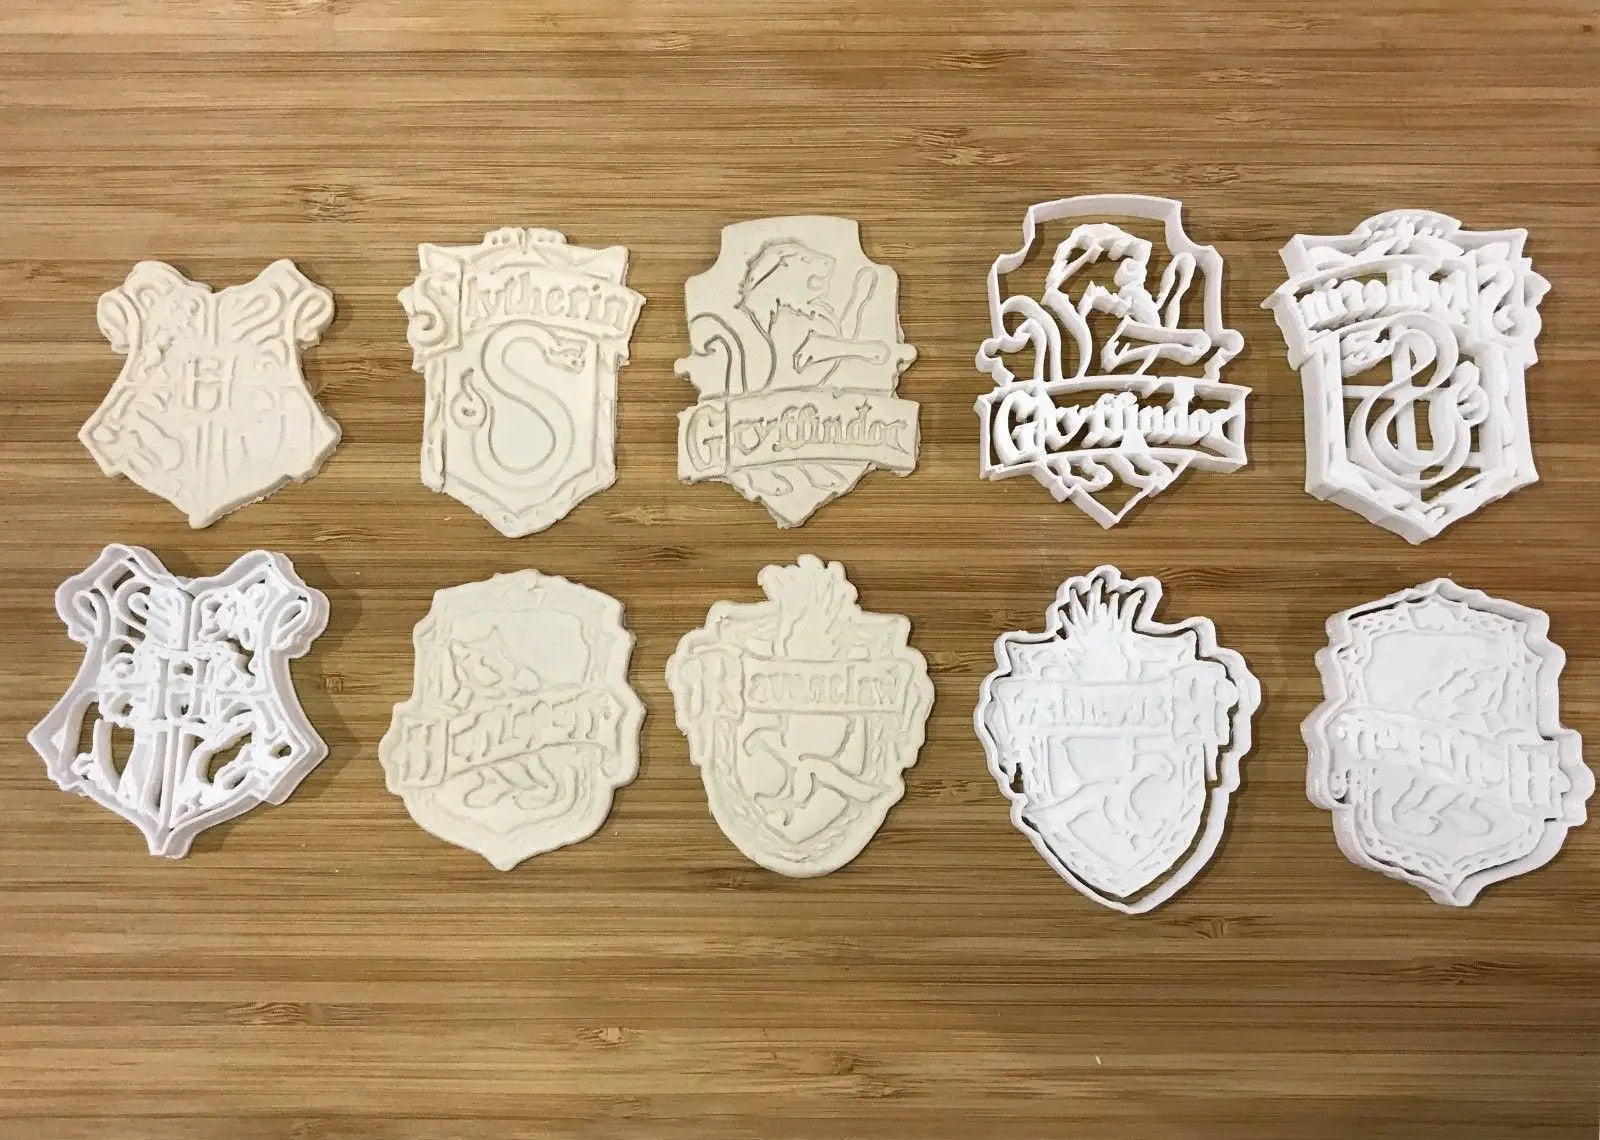 Harry Potter cookie cutter